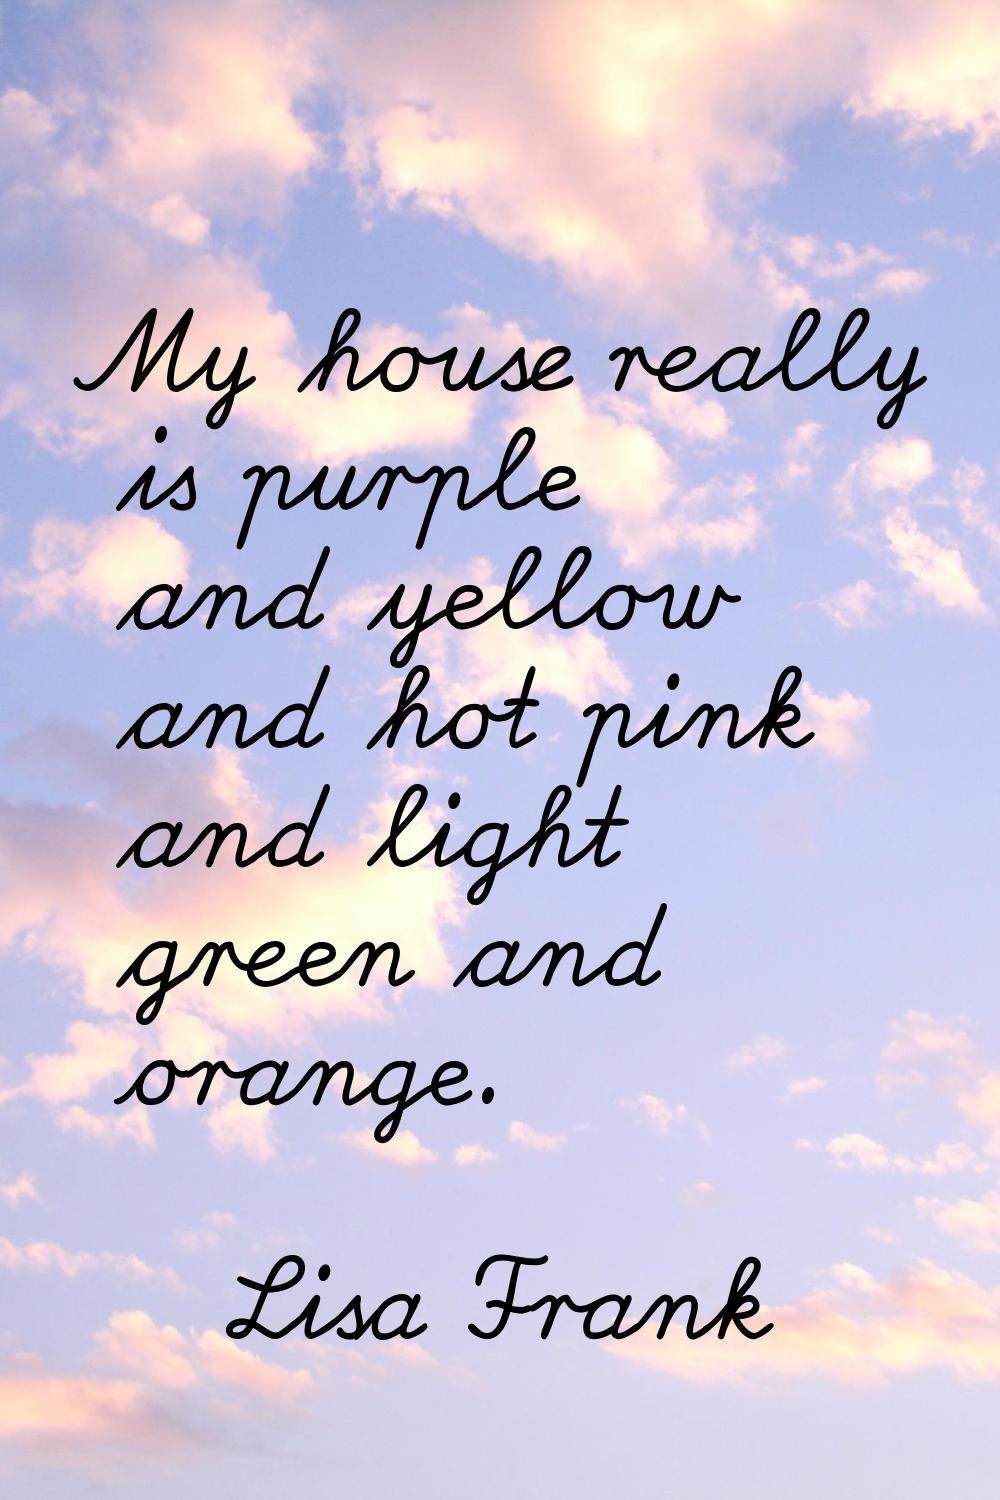 My house really is purple and yellow and hot pink and light green and orange.